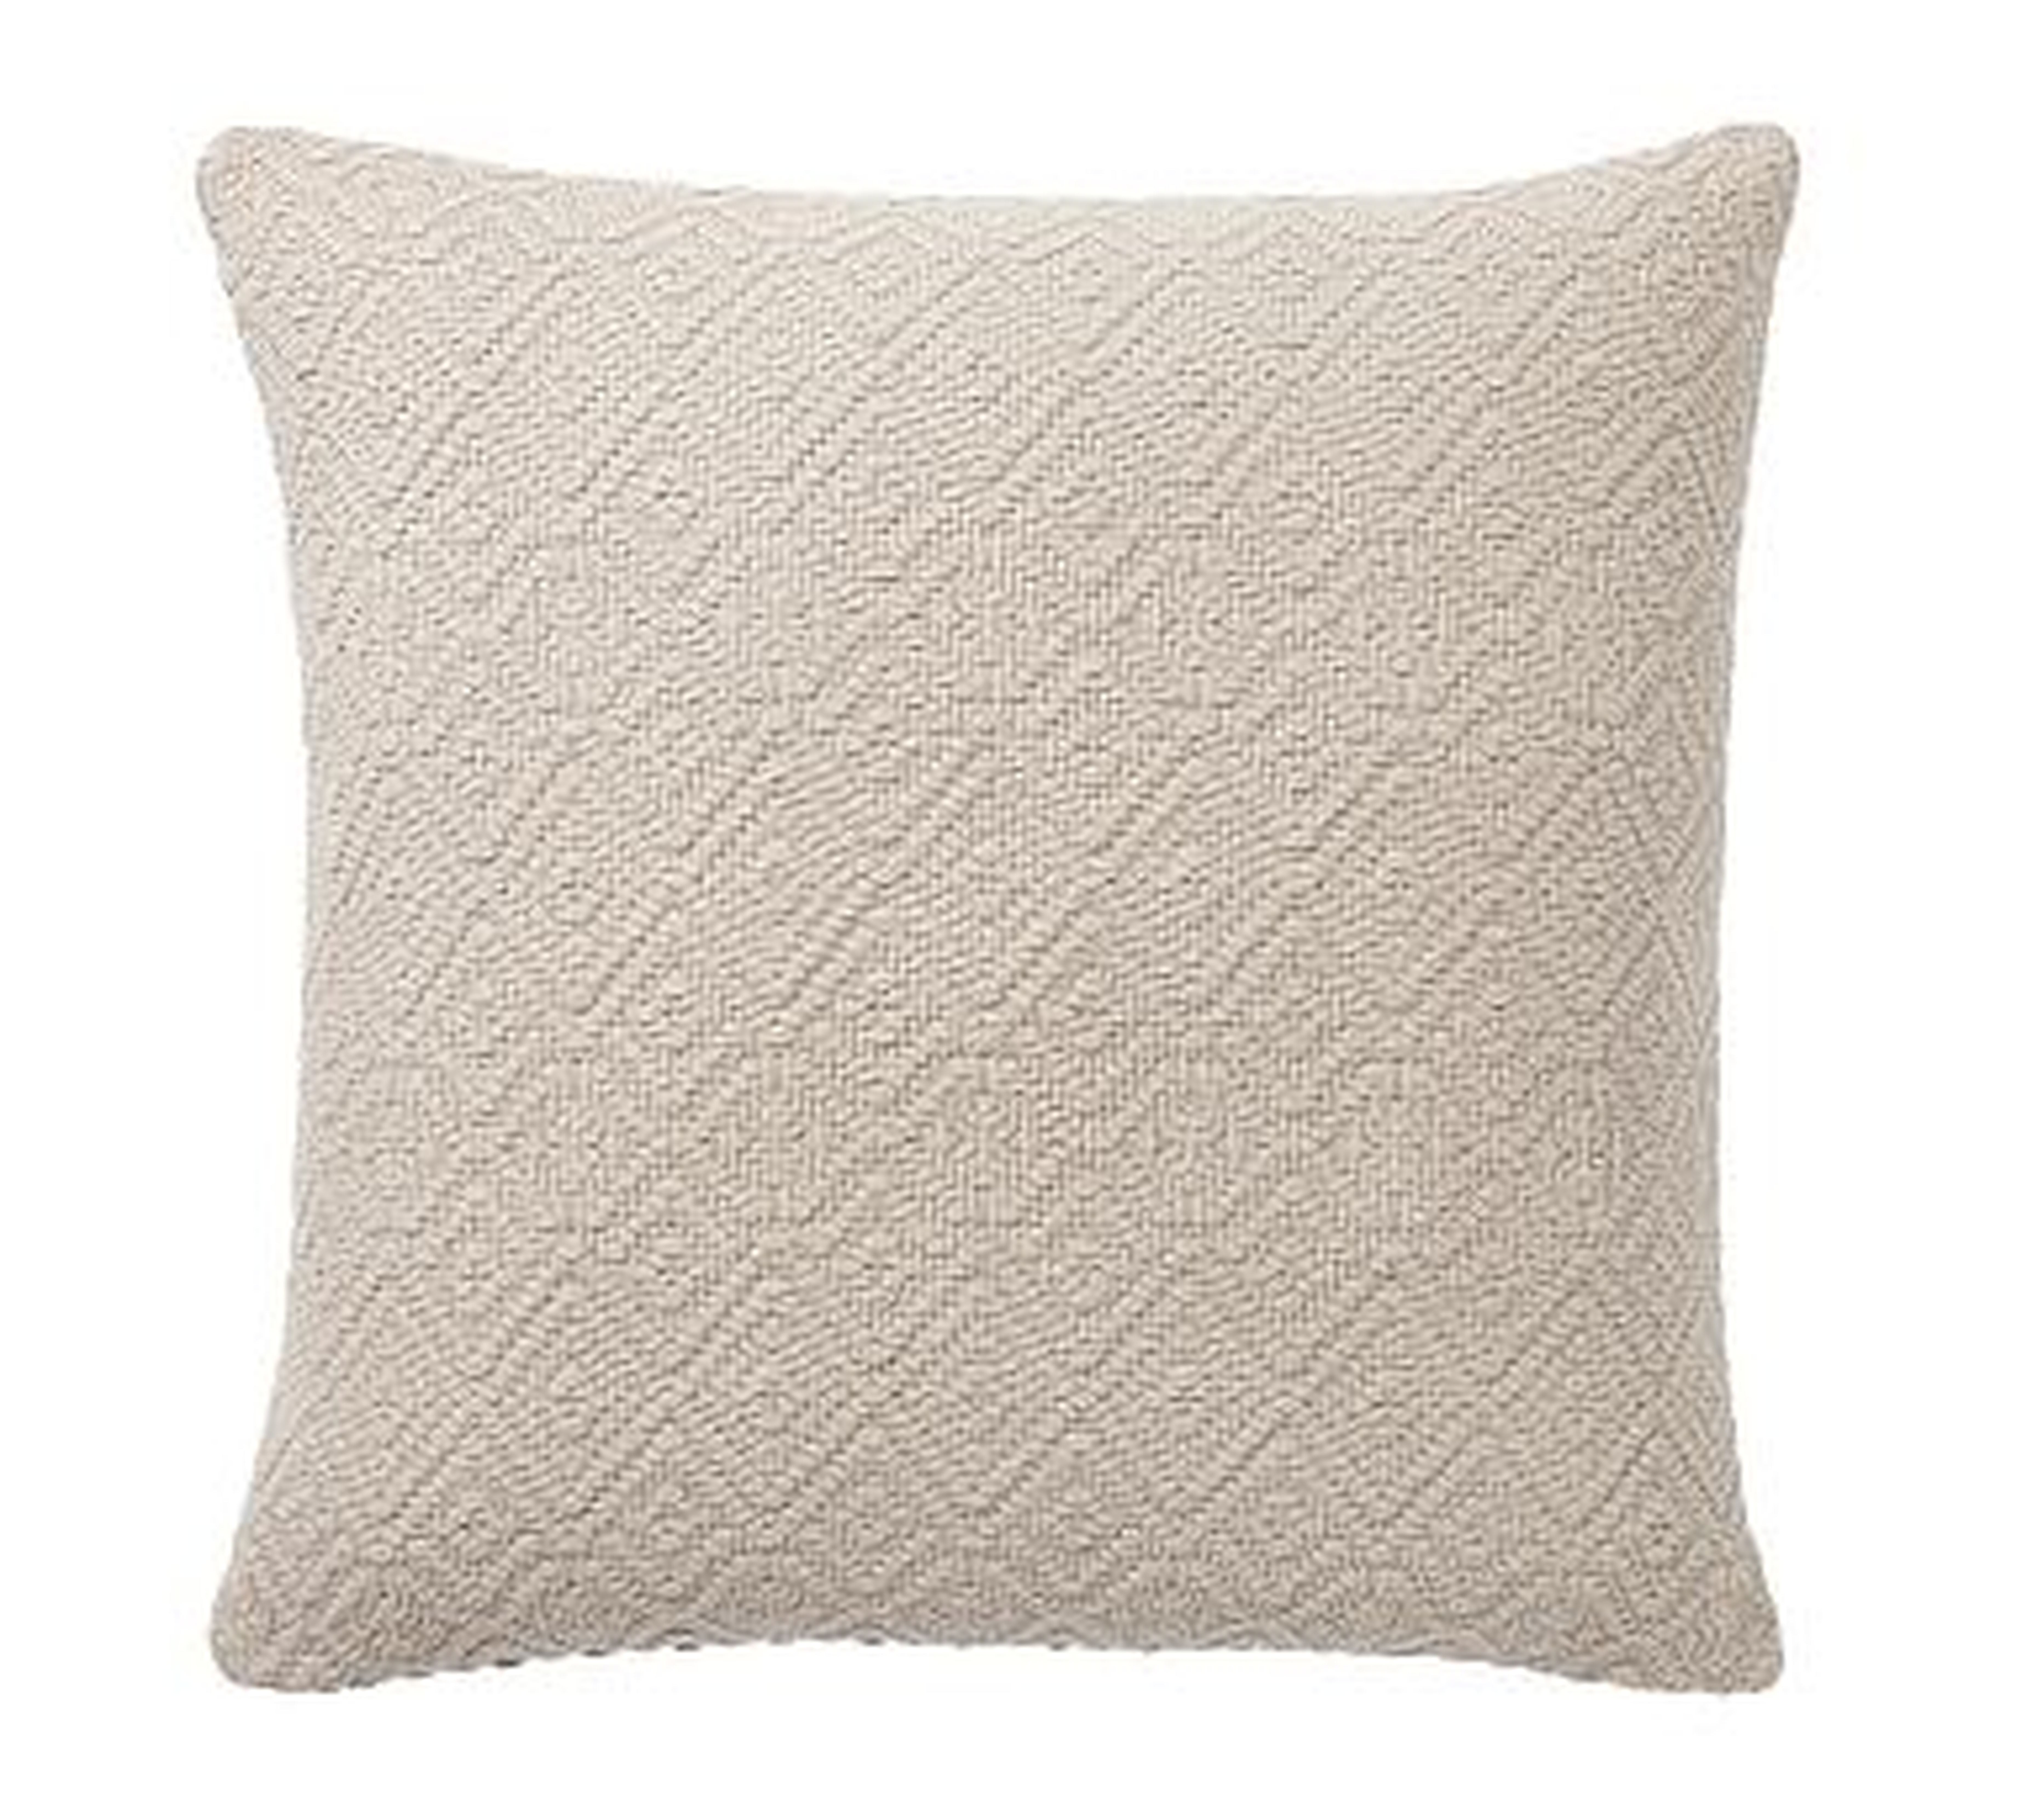 Washed Diamond Pillow Cover, 20", Flax - Pottery Barn